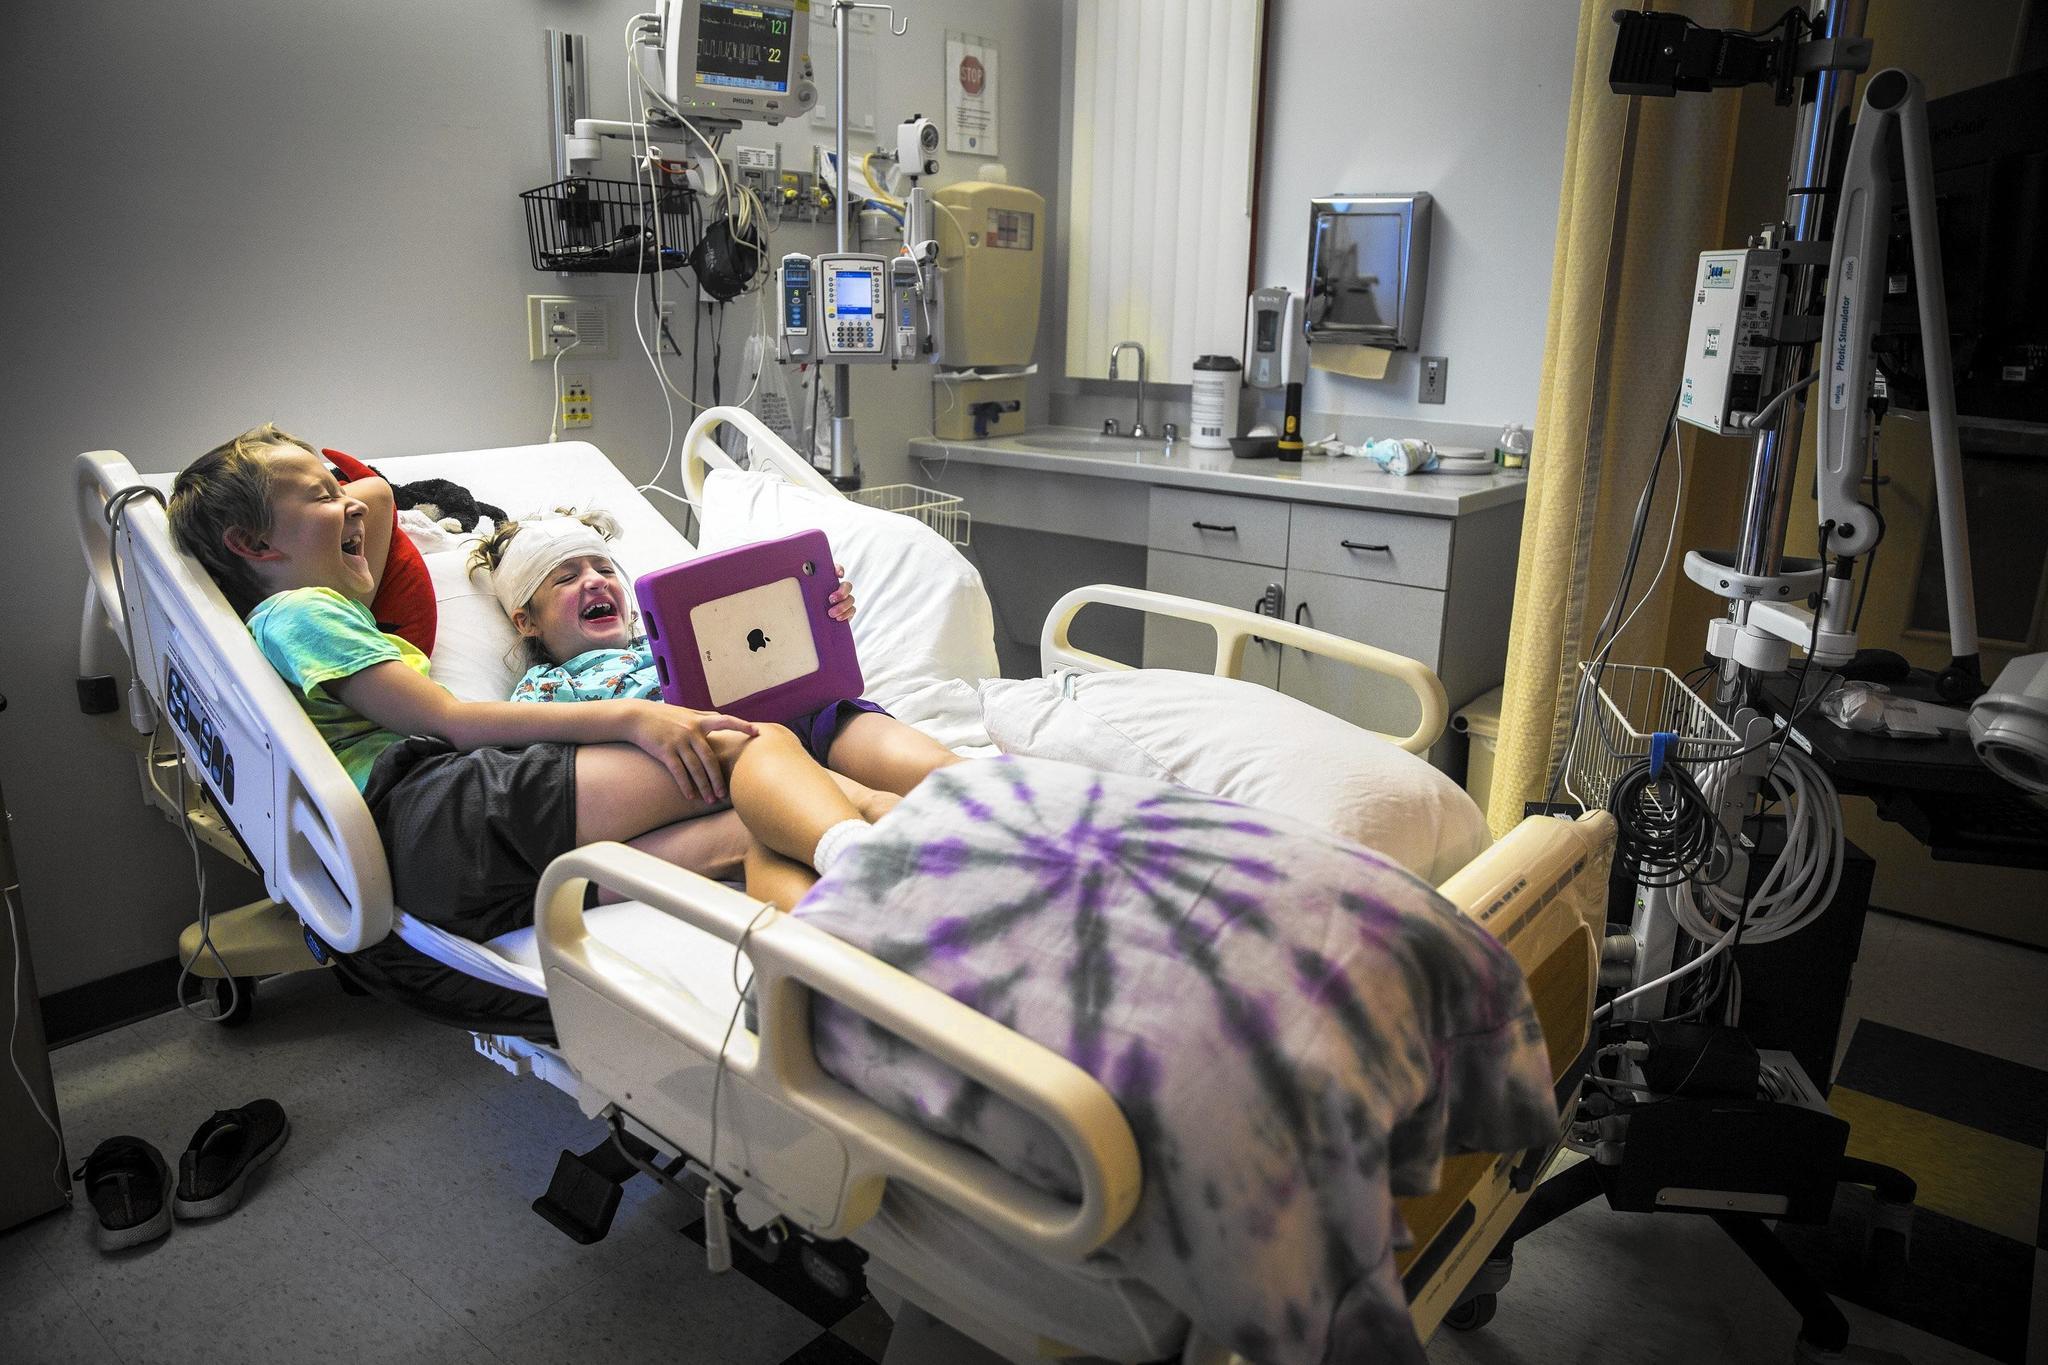 West Tarricone and her twin brother, Blake, watch TV on an iPad in her hospital bed at Connecticut Children